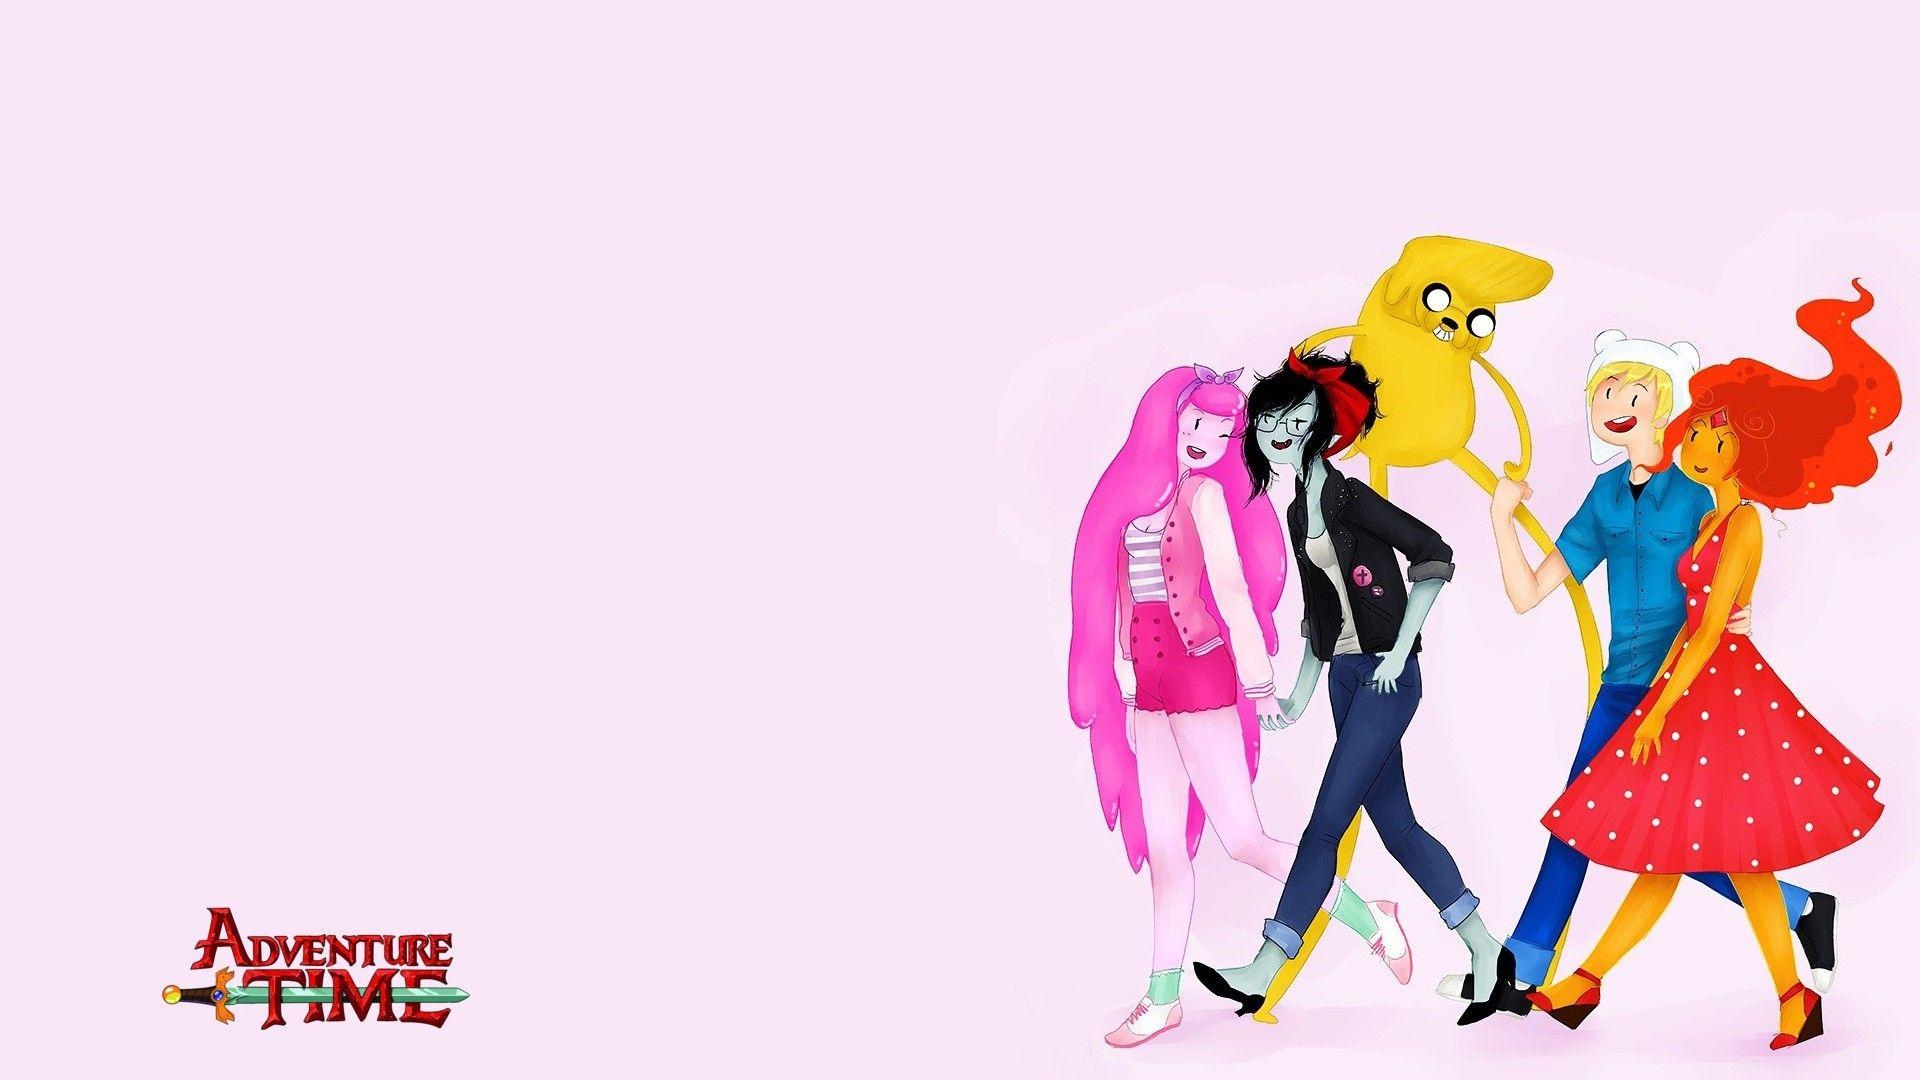 Adventure Time, Jake the Dog, Marceline the Vampire Queen, Princess